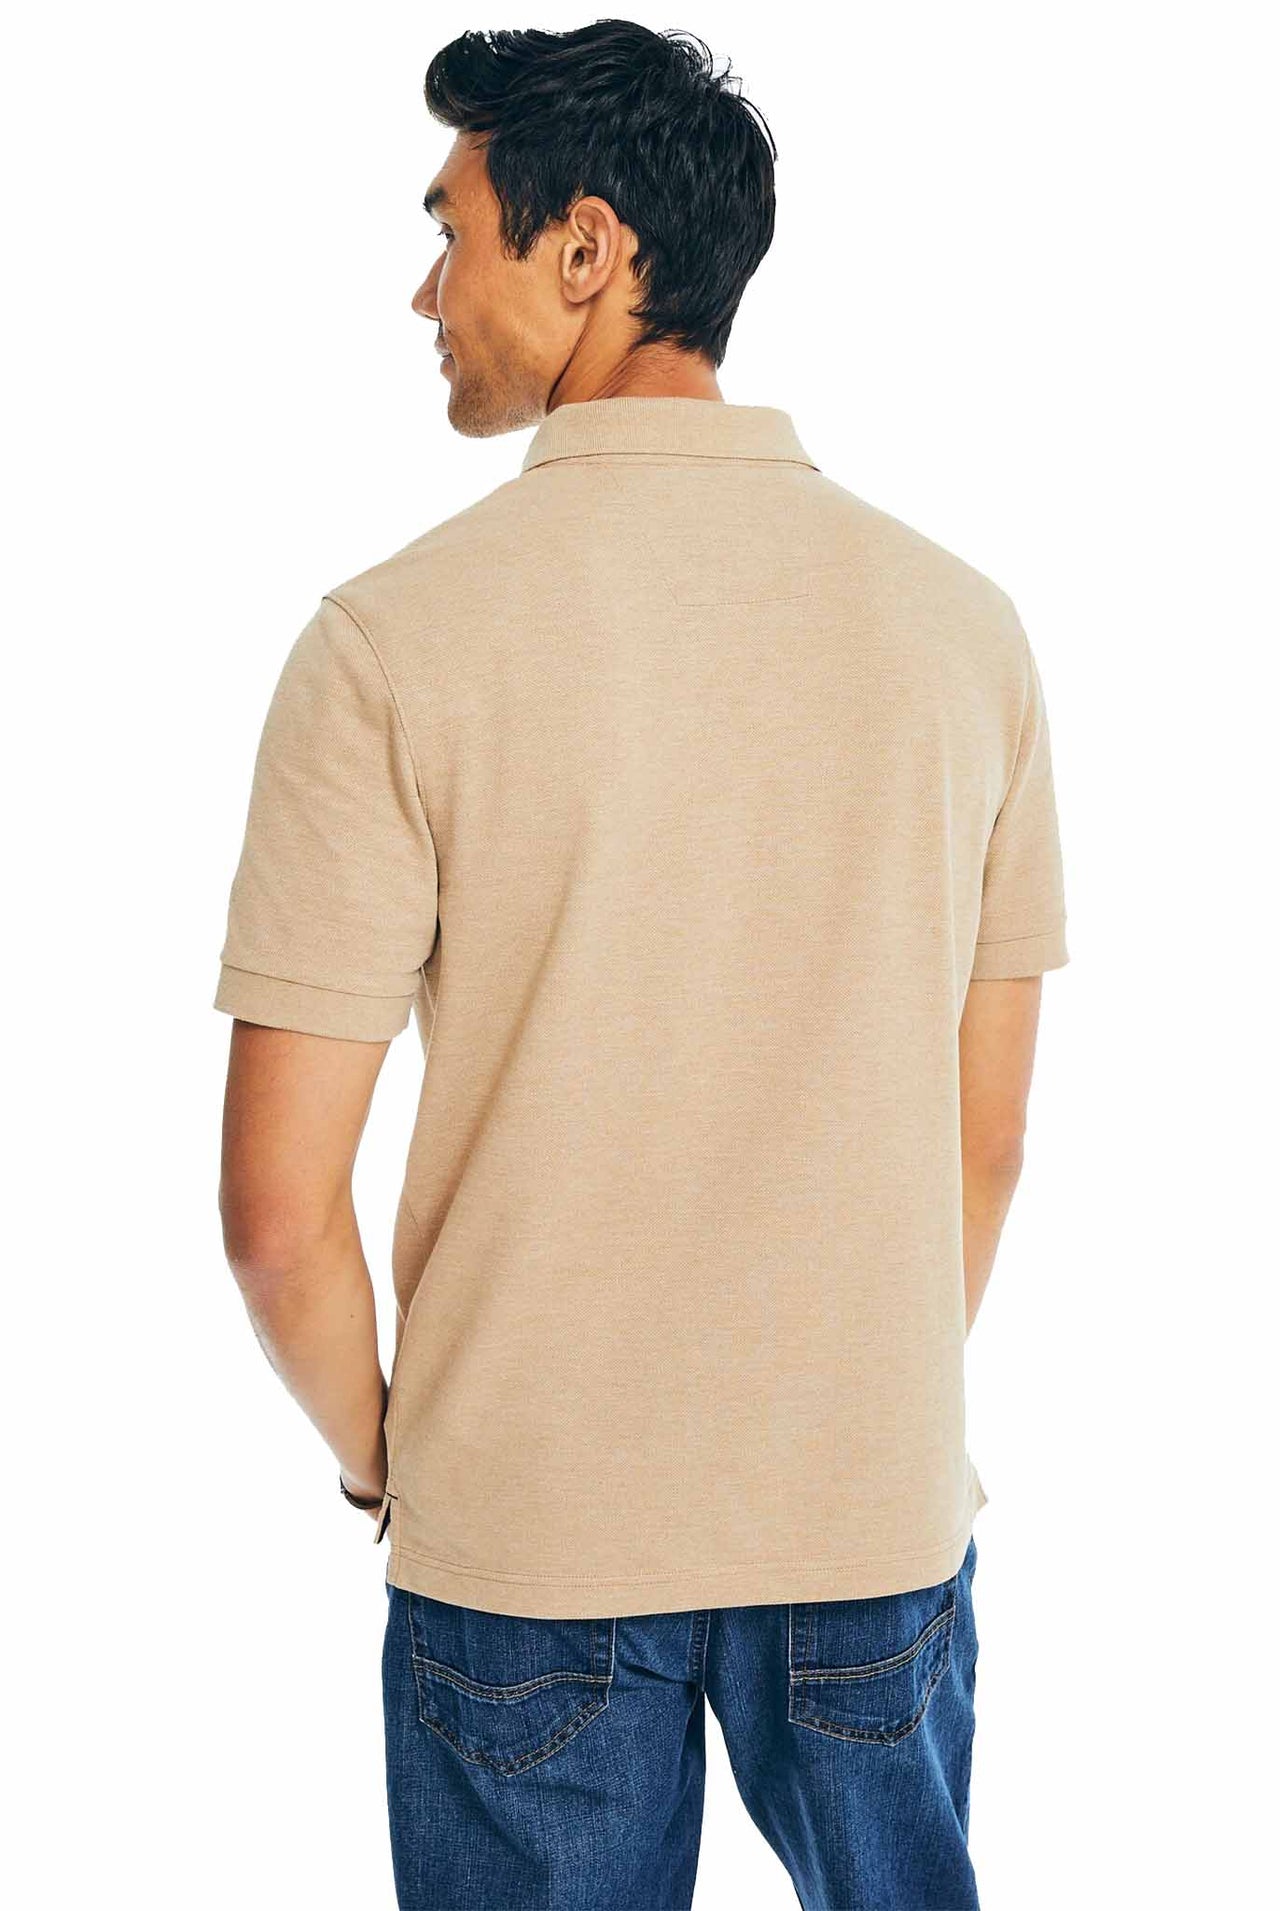 Polo Nautica Classic Fit Deck Camel Heather